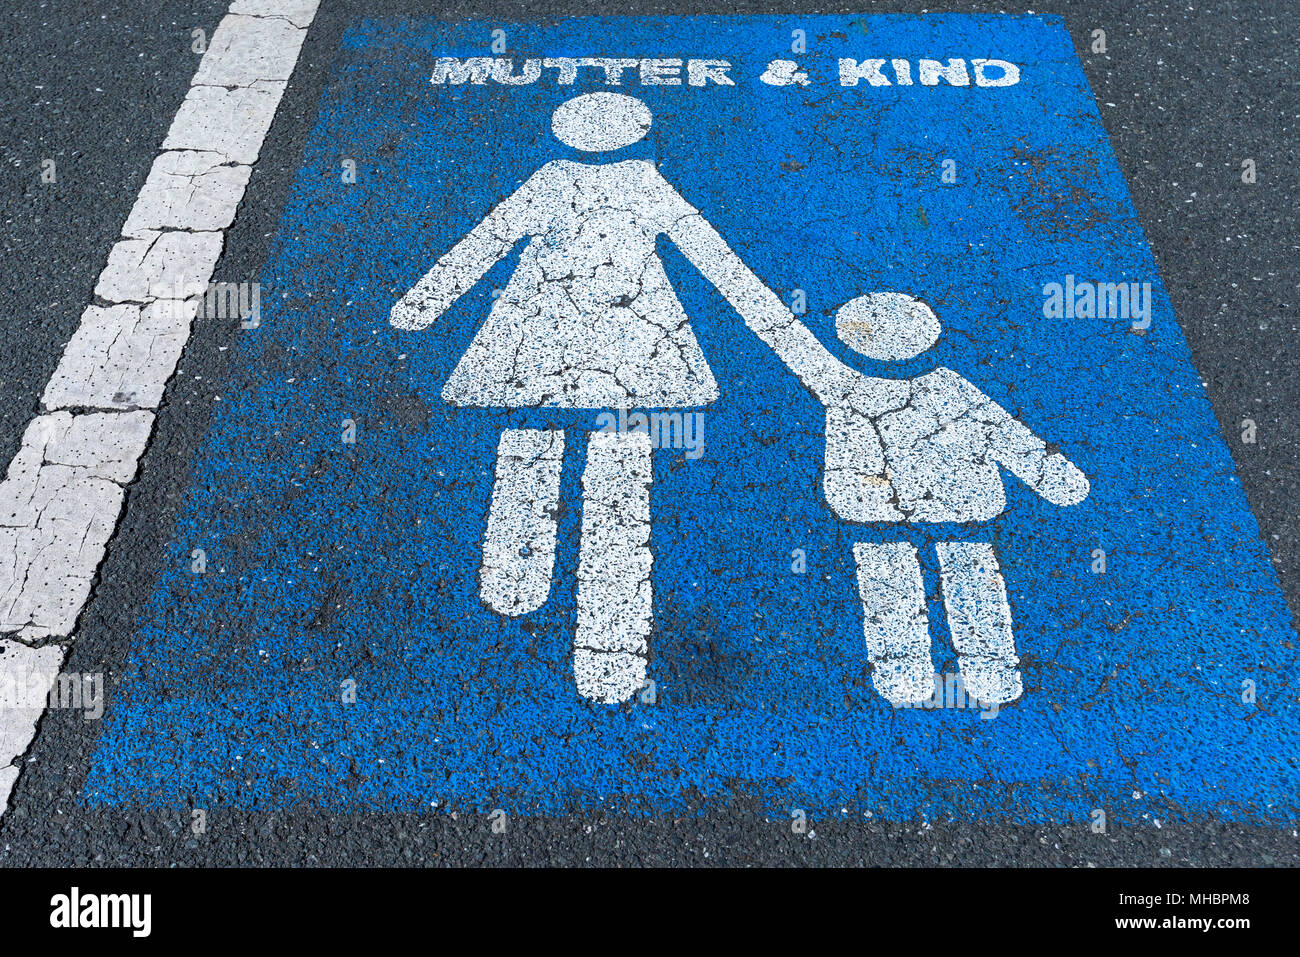 Marking on tar, parking lot for mother and child, Bavaria, Germany Stock Photo